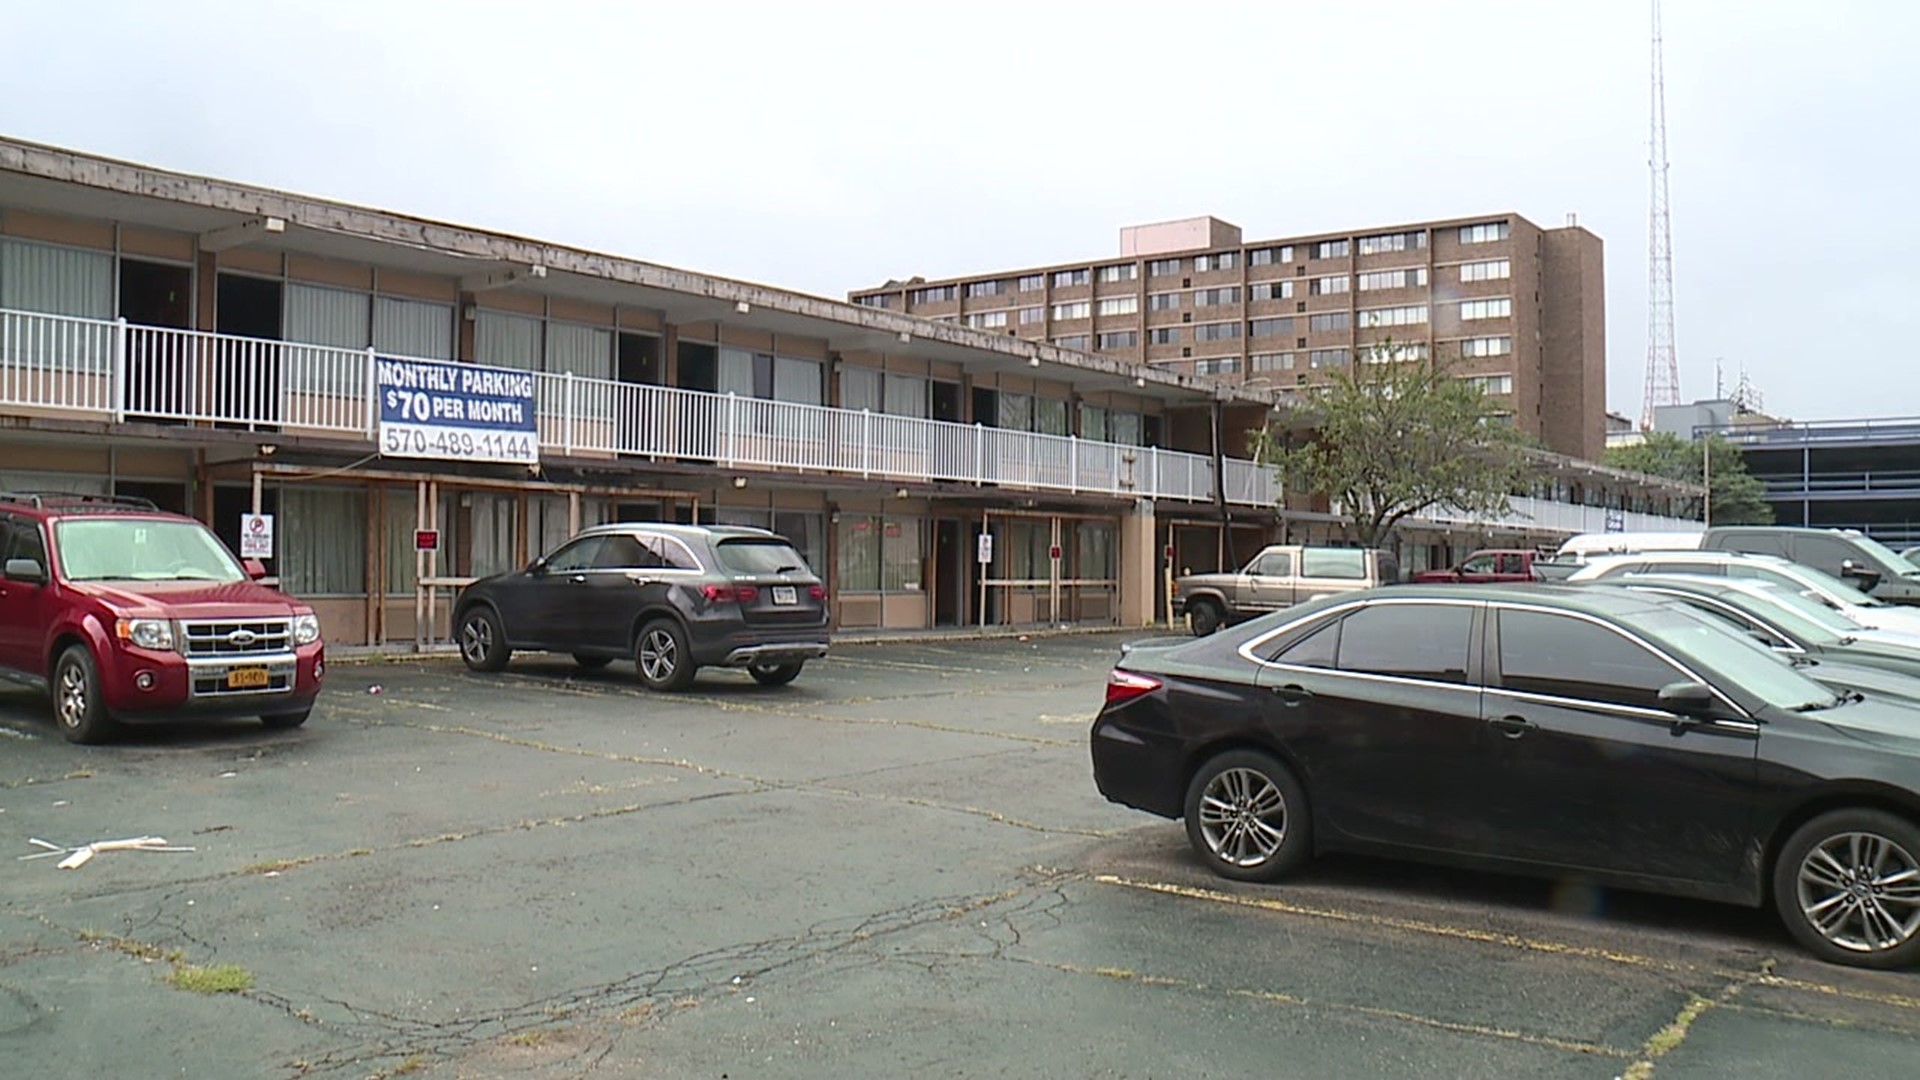 An auctioneer sold off parts of an old hotel in downtown Scranton, the last step before the building is scheduled to be razed next month.